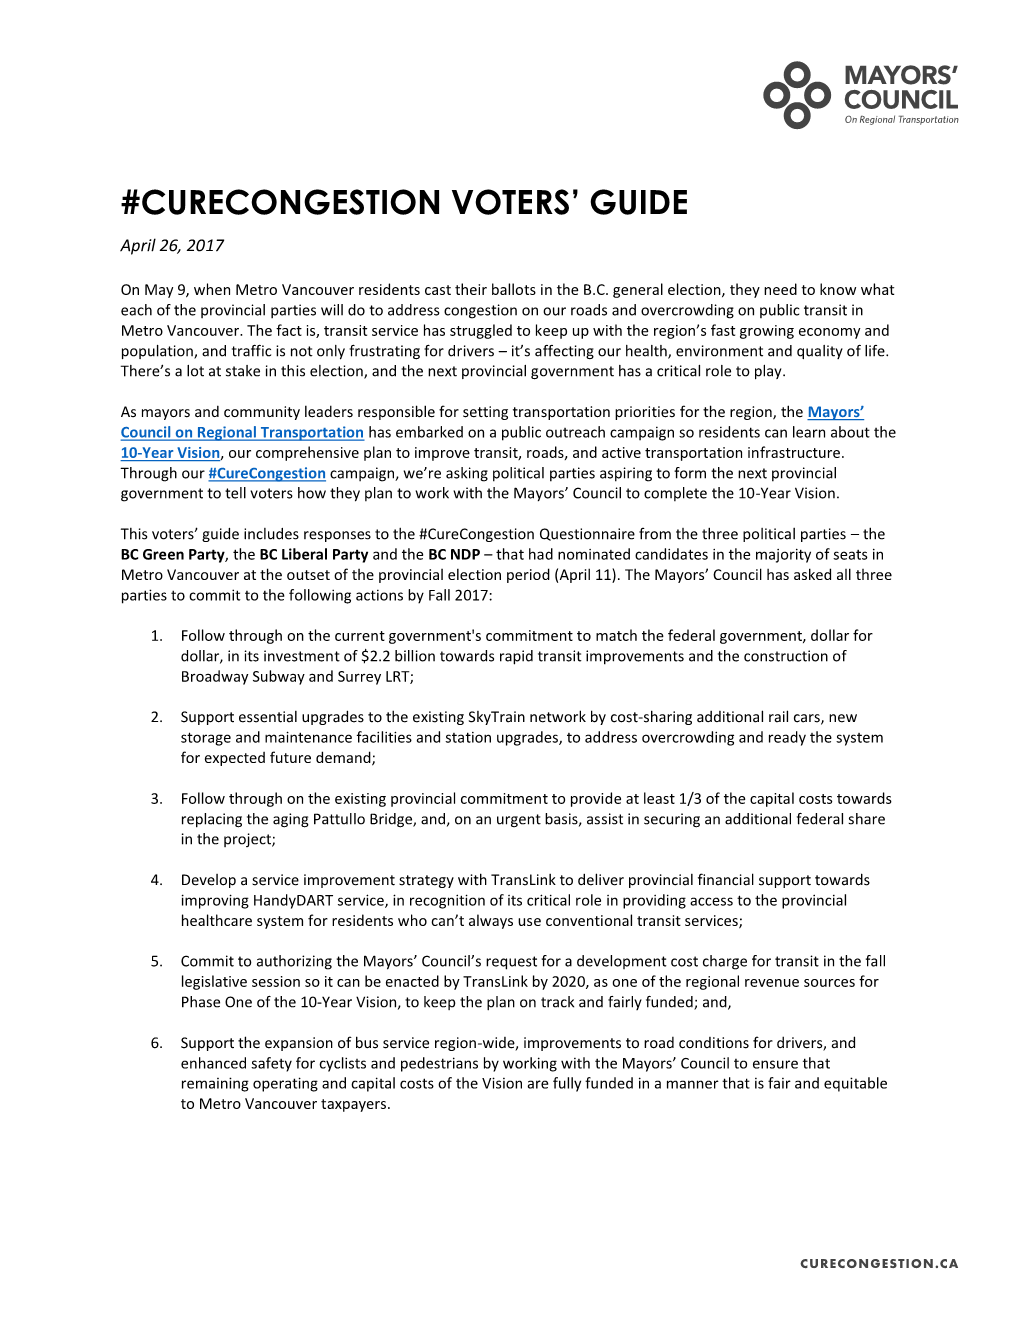 Curecongestion Voters' Guide